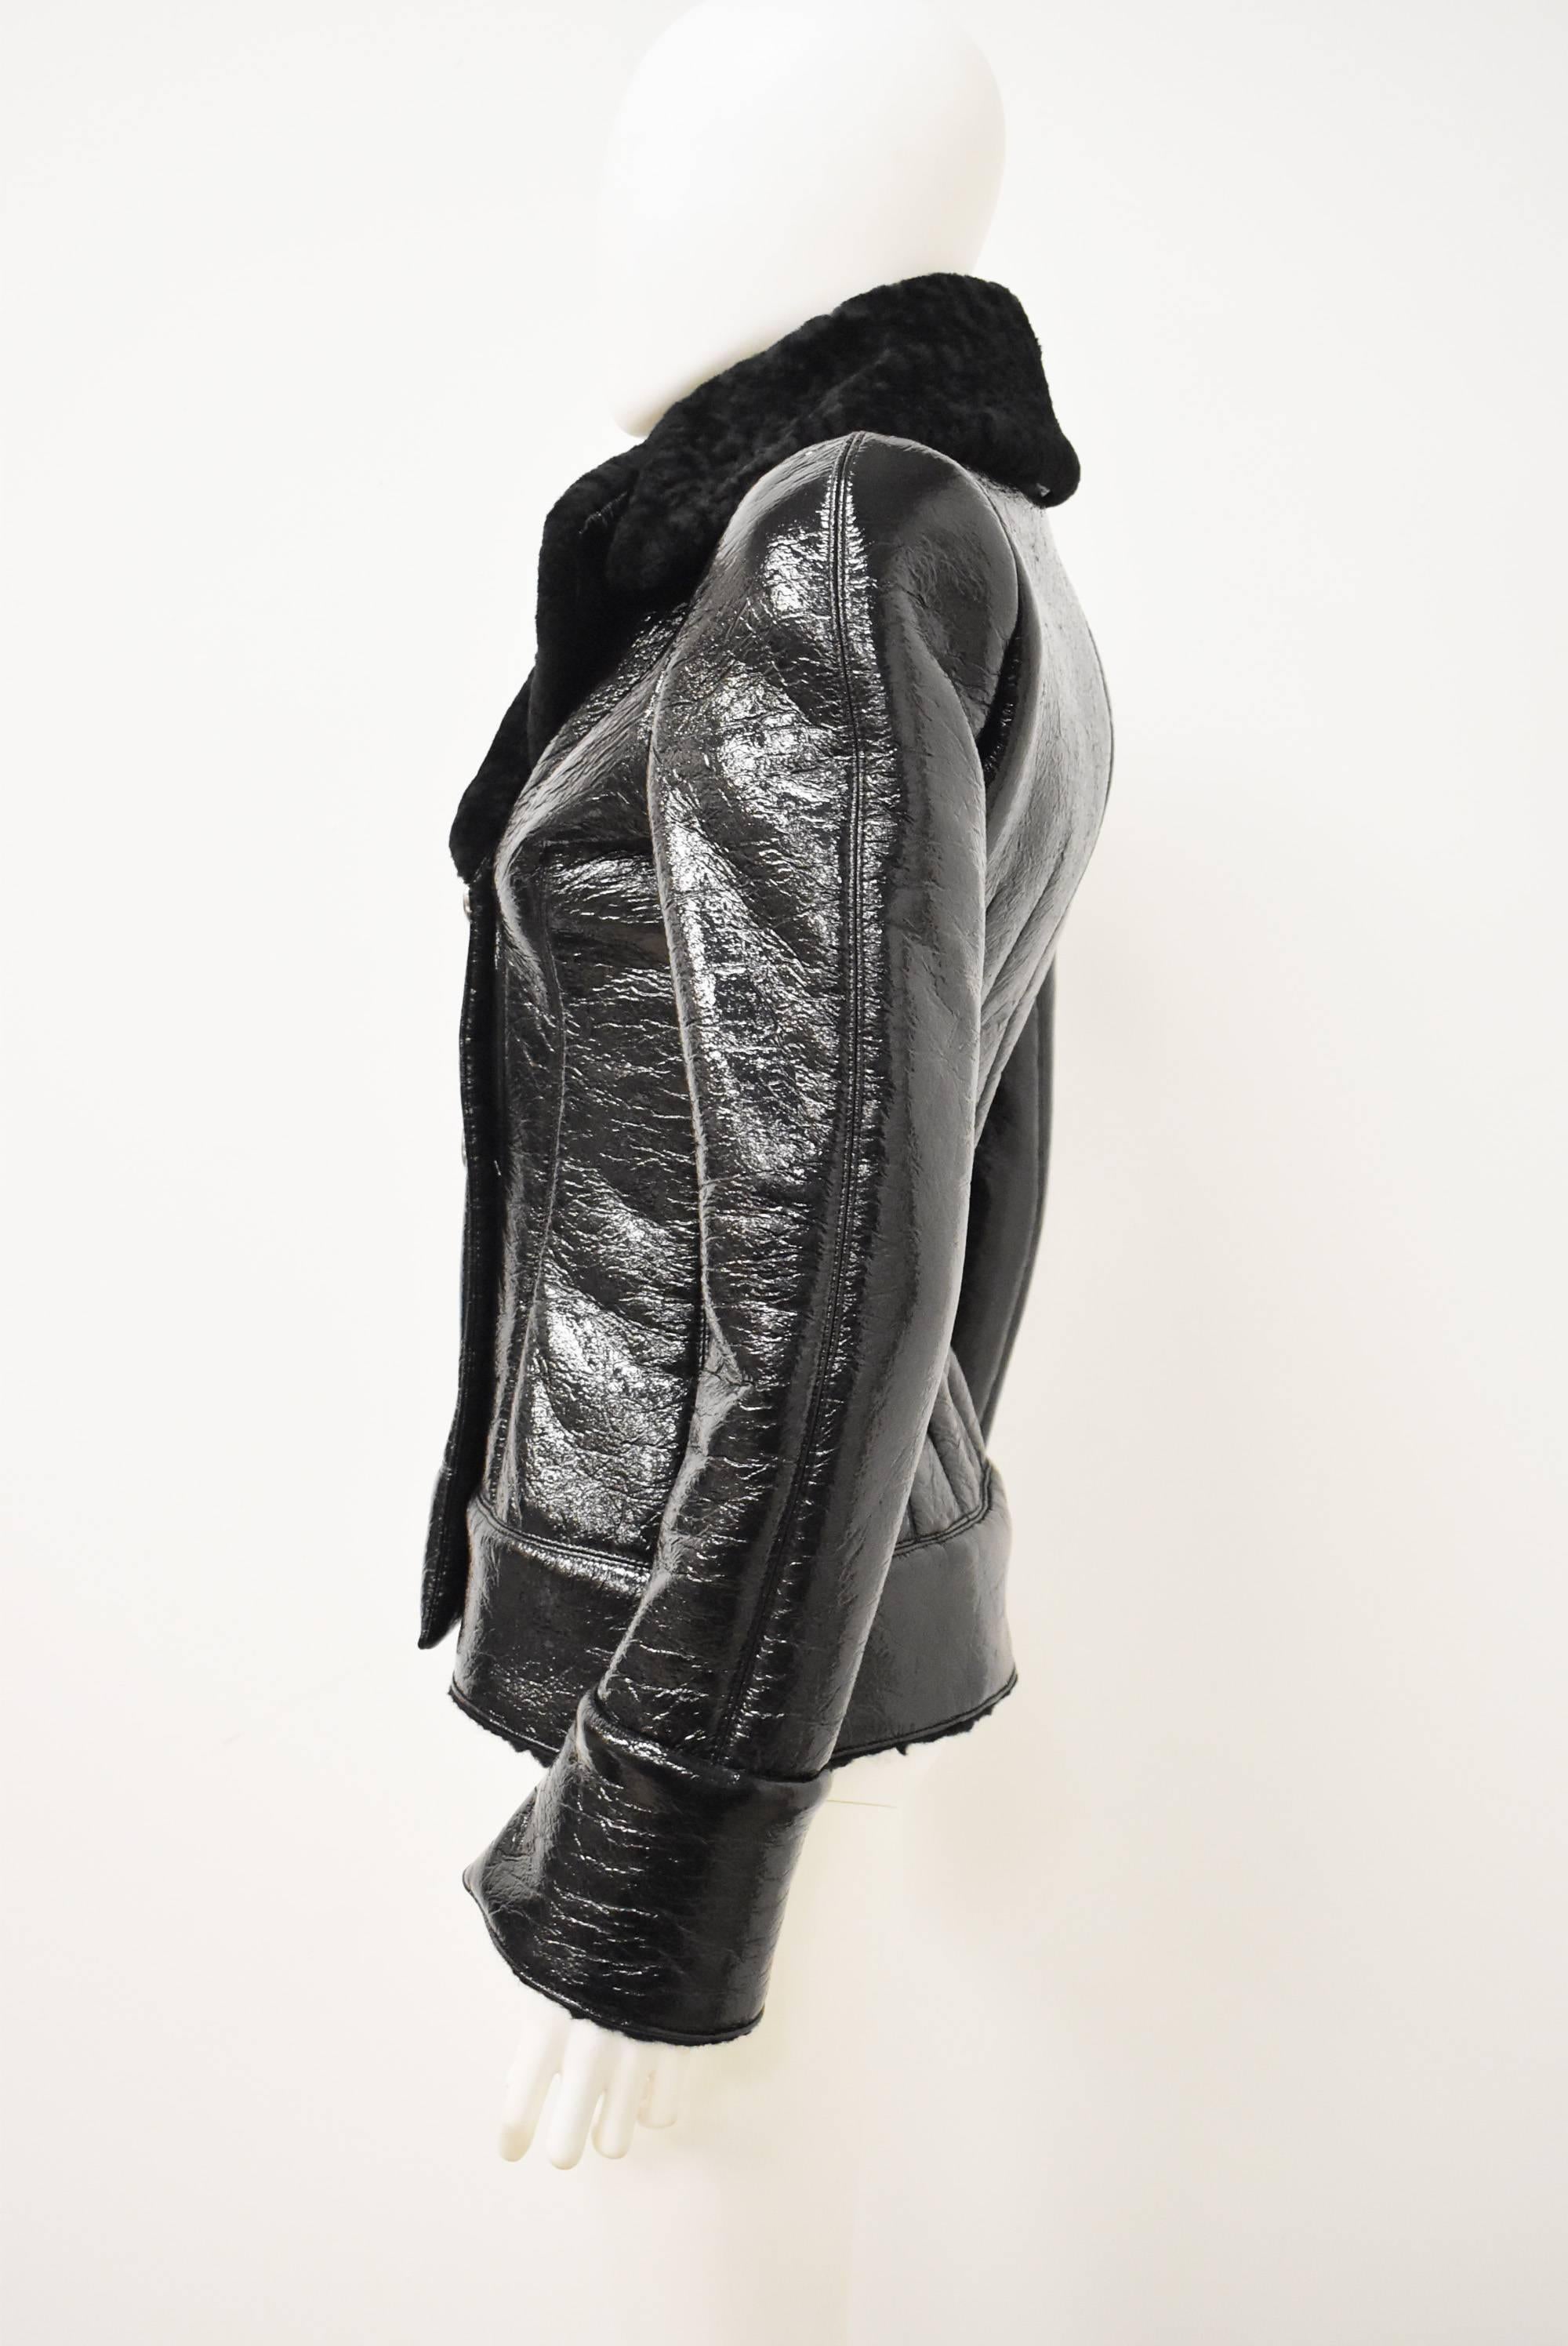 A luxurious patent leather and shearling jacket by Alexander McQueen. The jacket is double breasted with button fastenings at the front and oversize textured collar. The jacket has an extremely fitted shape with several darts in the back pulling in